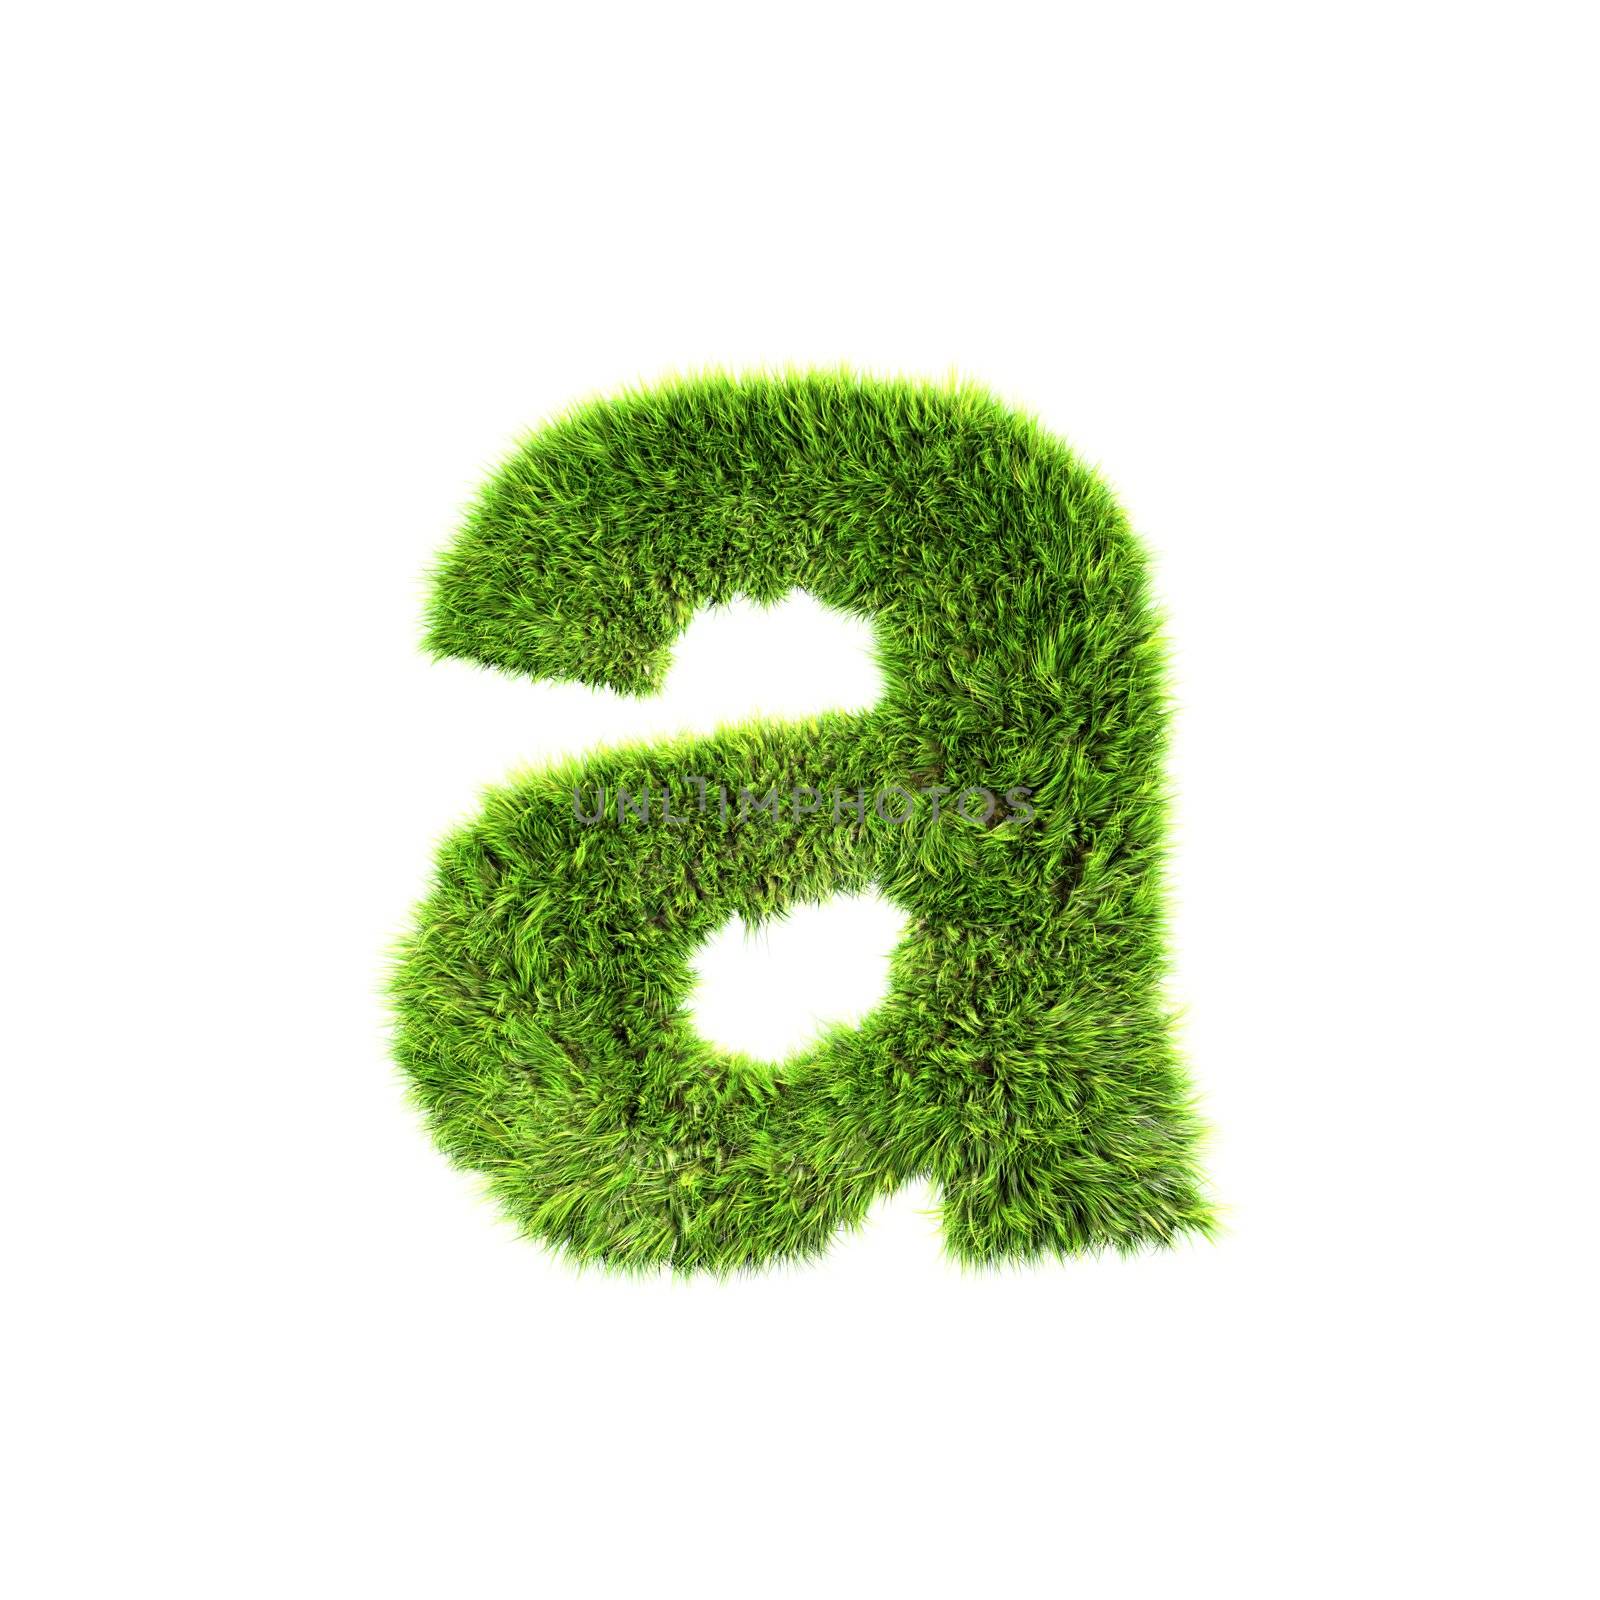 3d grass letter isolated on white background - a by chrisroll